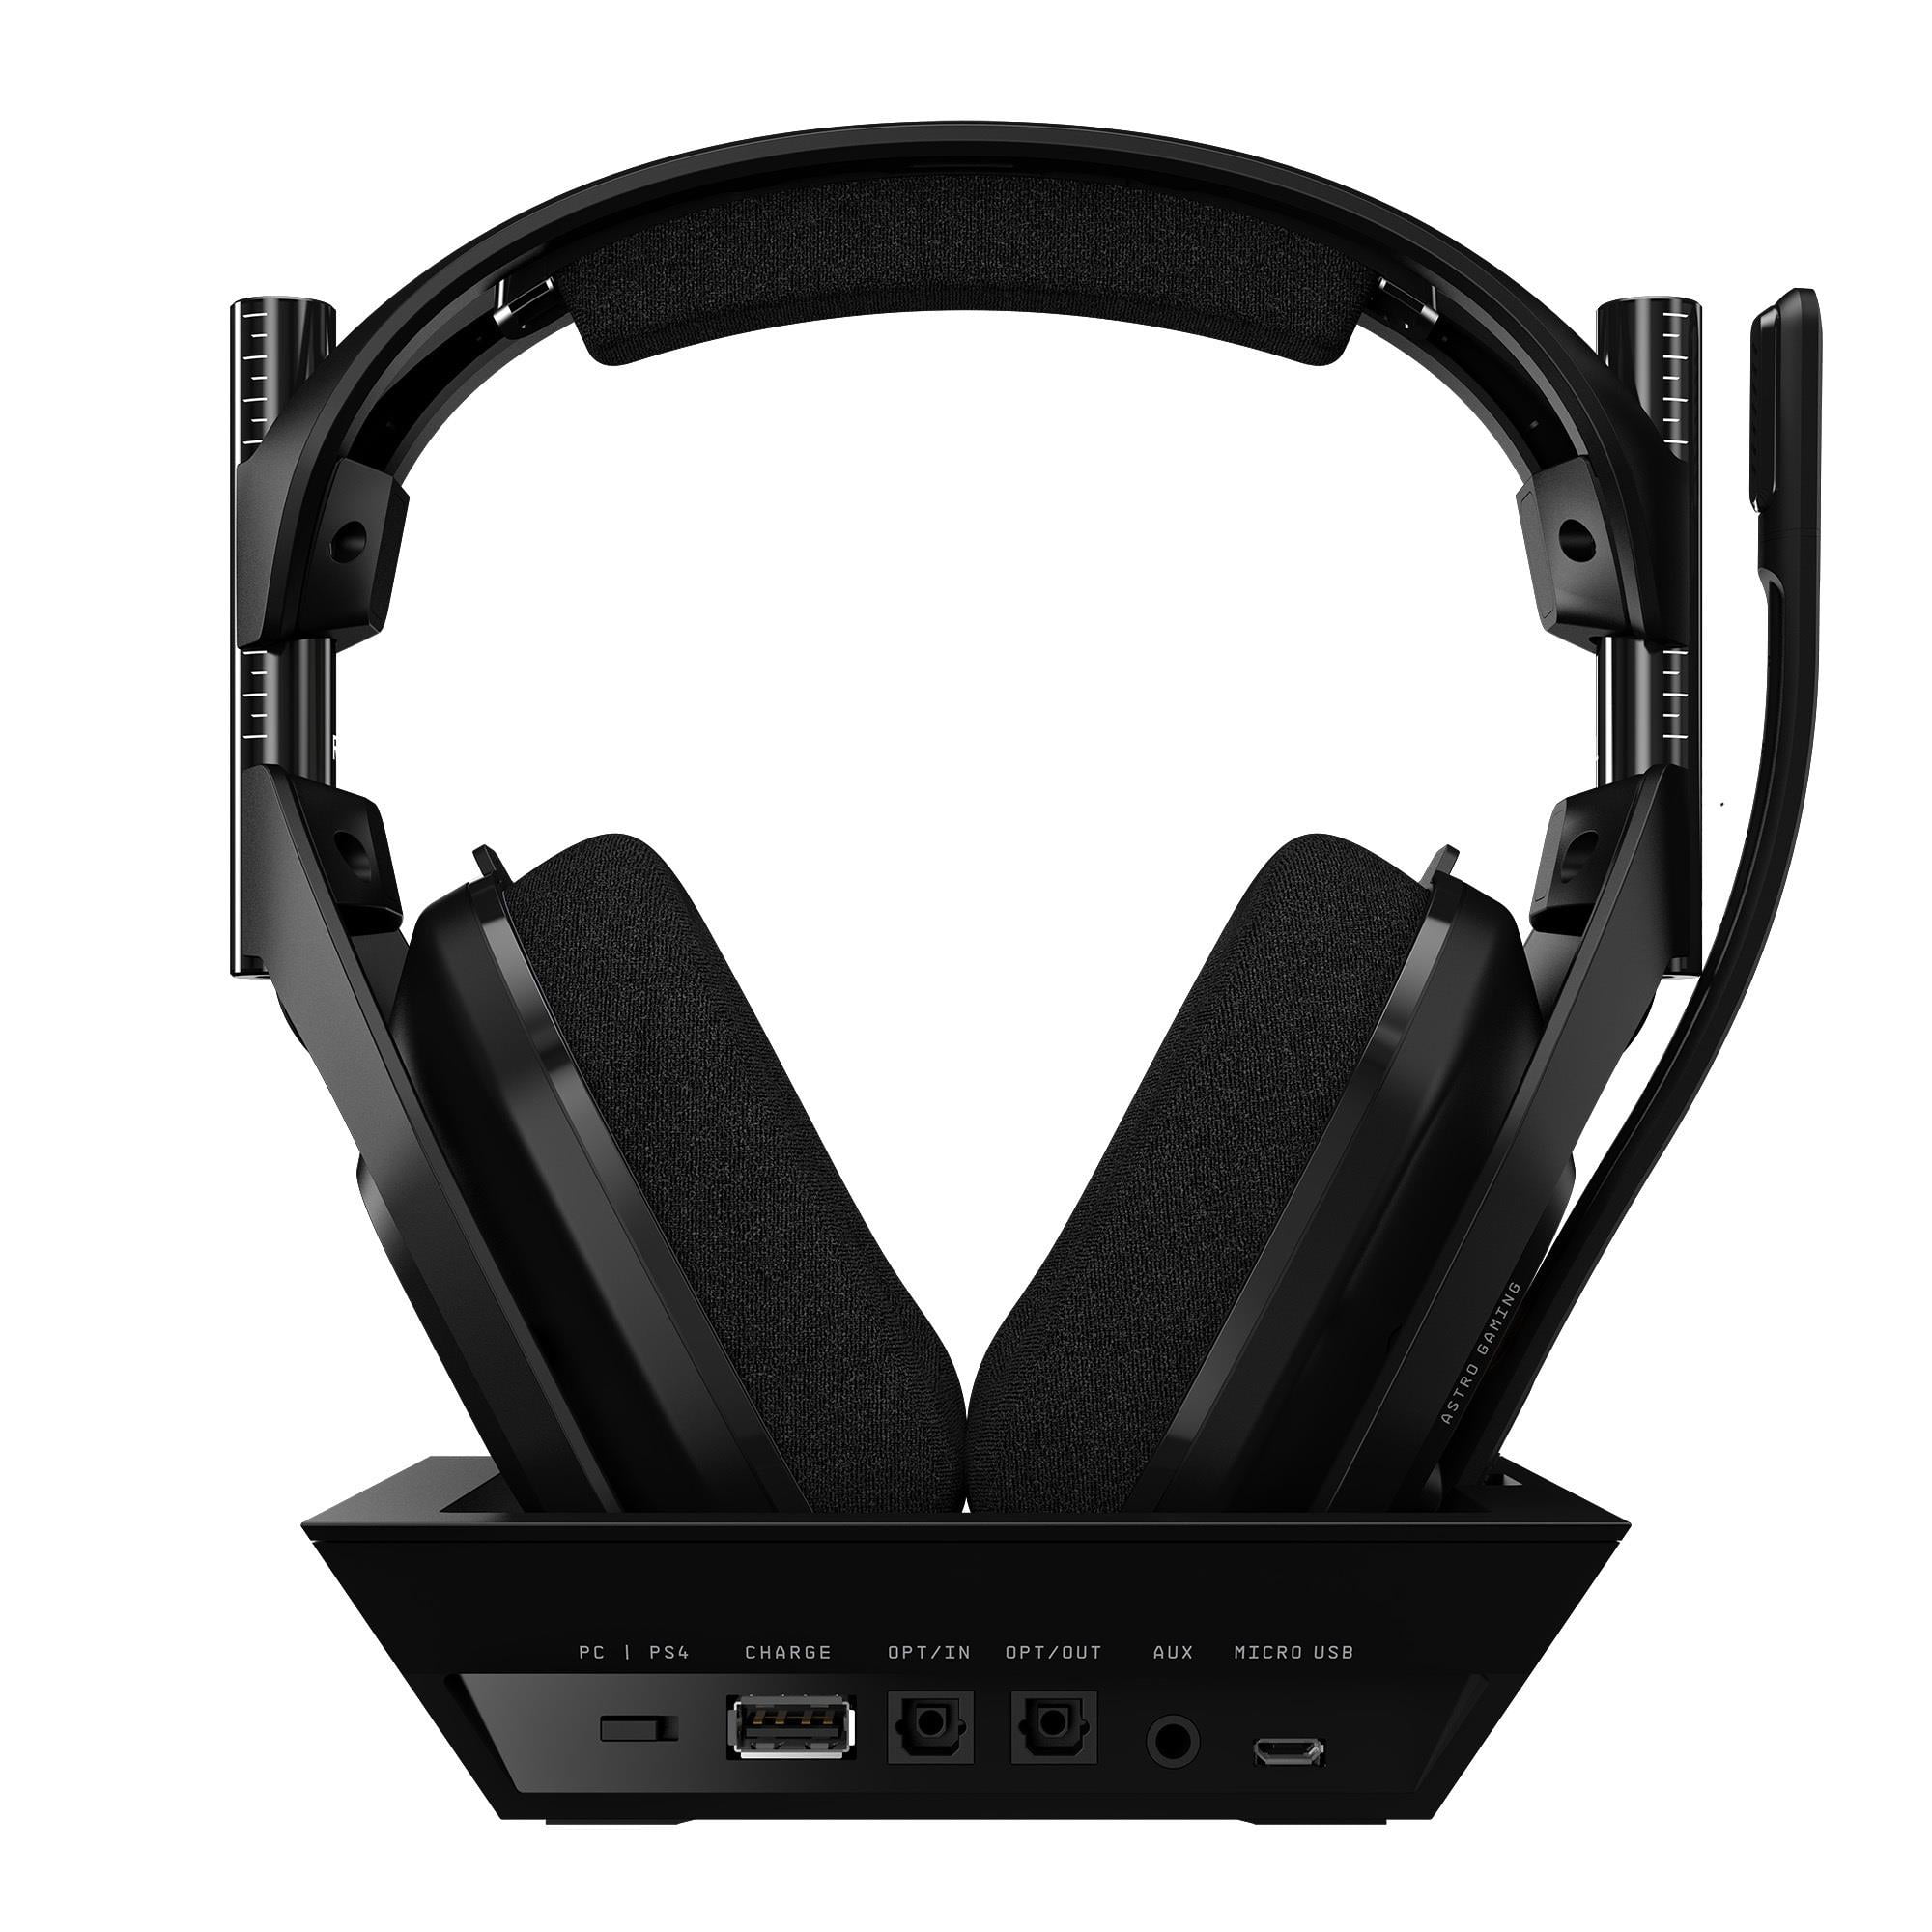 Larry Belmont chokolade Regeringsforordning ASTRO Gaming A50 Wireless Headset For PlayStation 4/5 with Base and HDMI  Adapter - Walmart.com